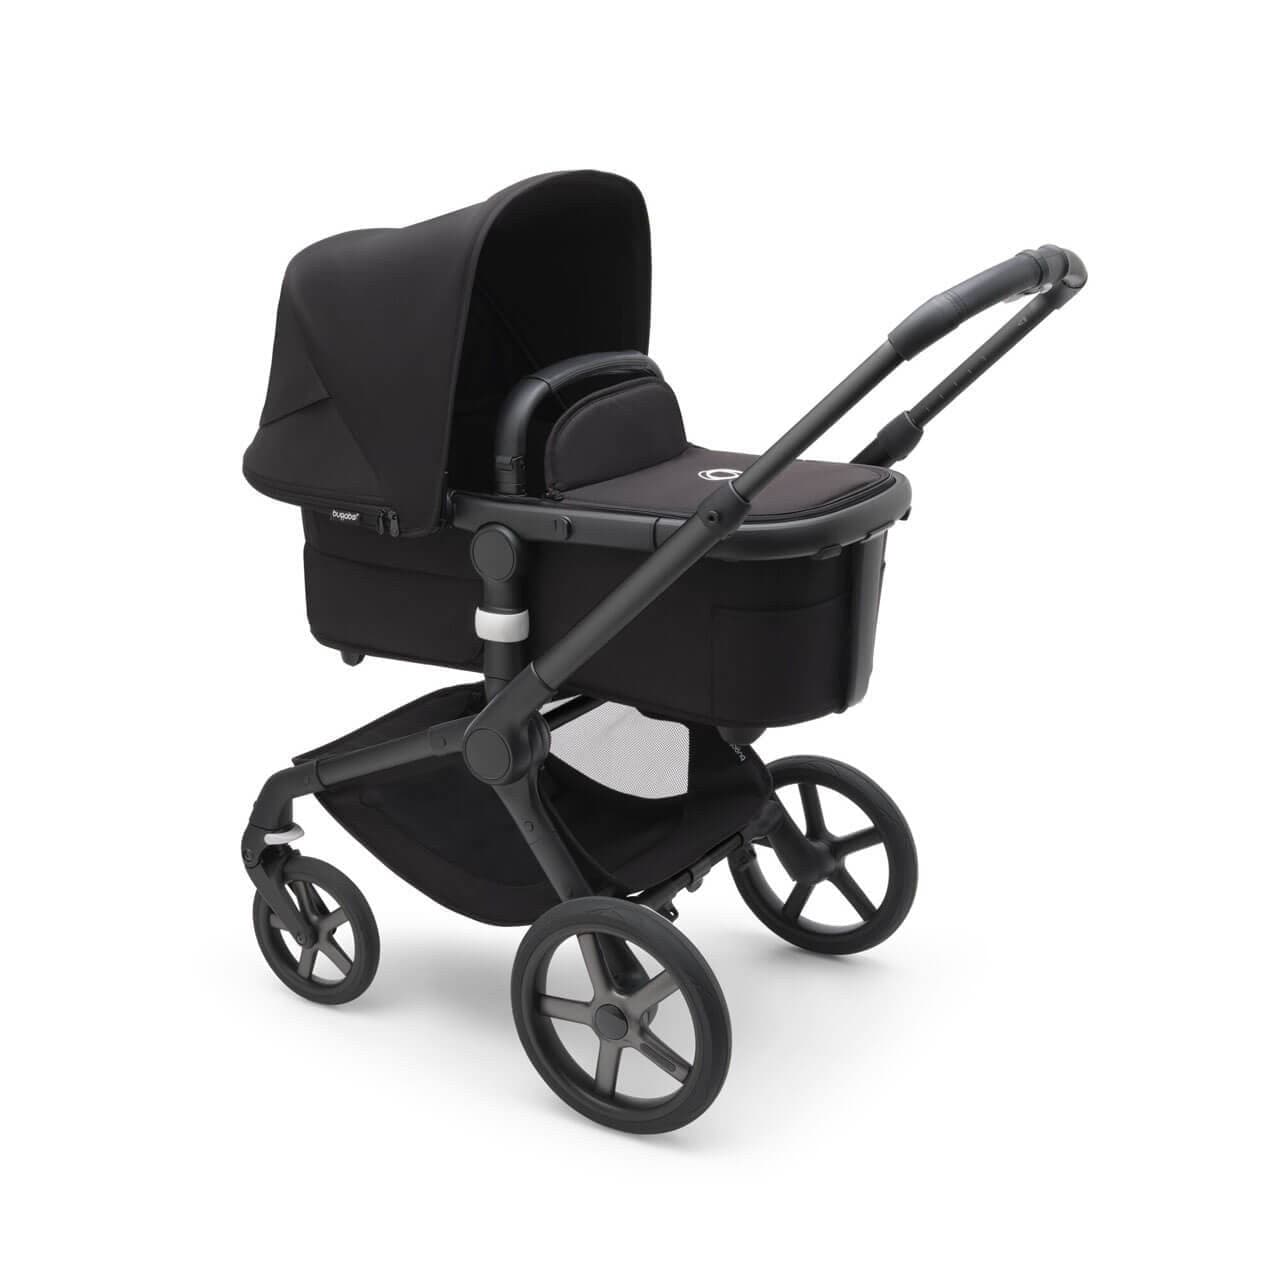 Bugaboo Fox 5 Essential Travel System Bundle - Black/Midnight Black - For Your Little One